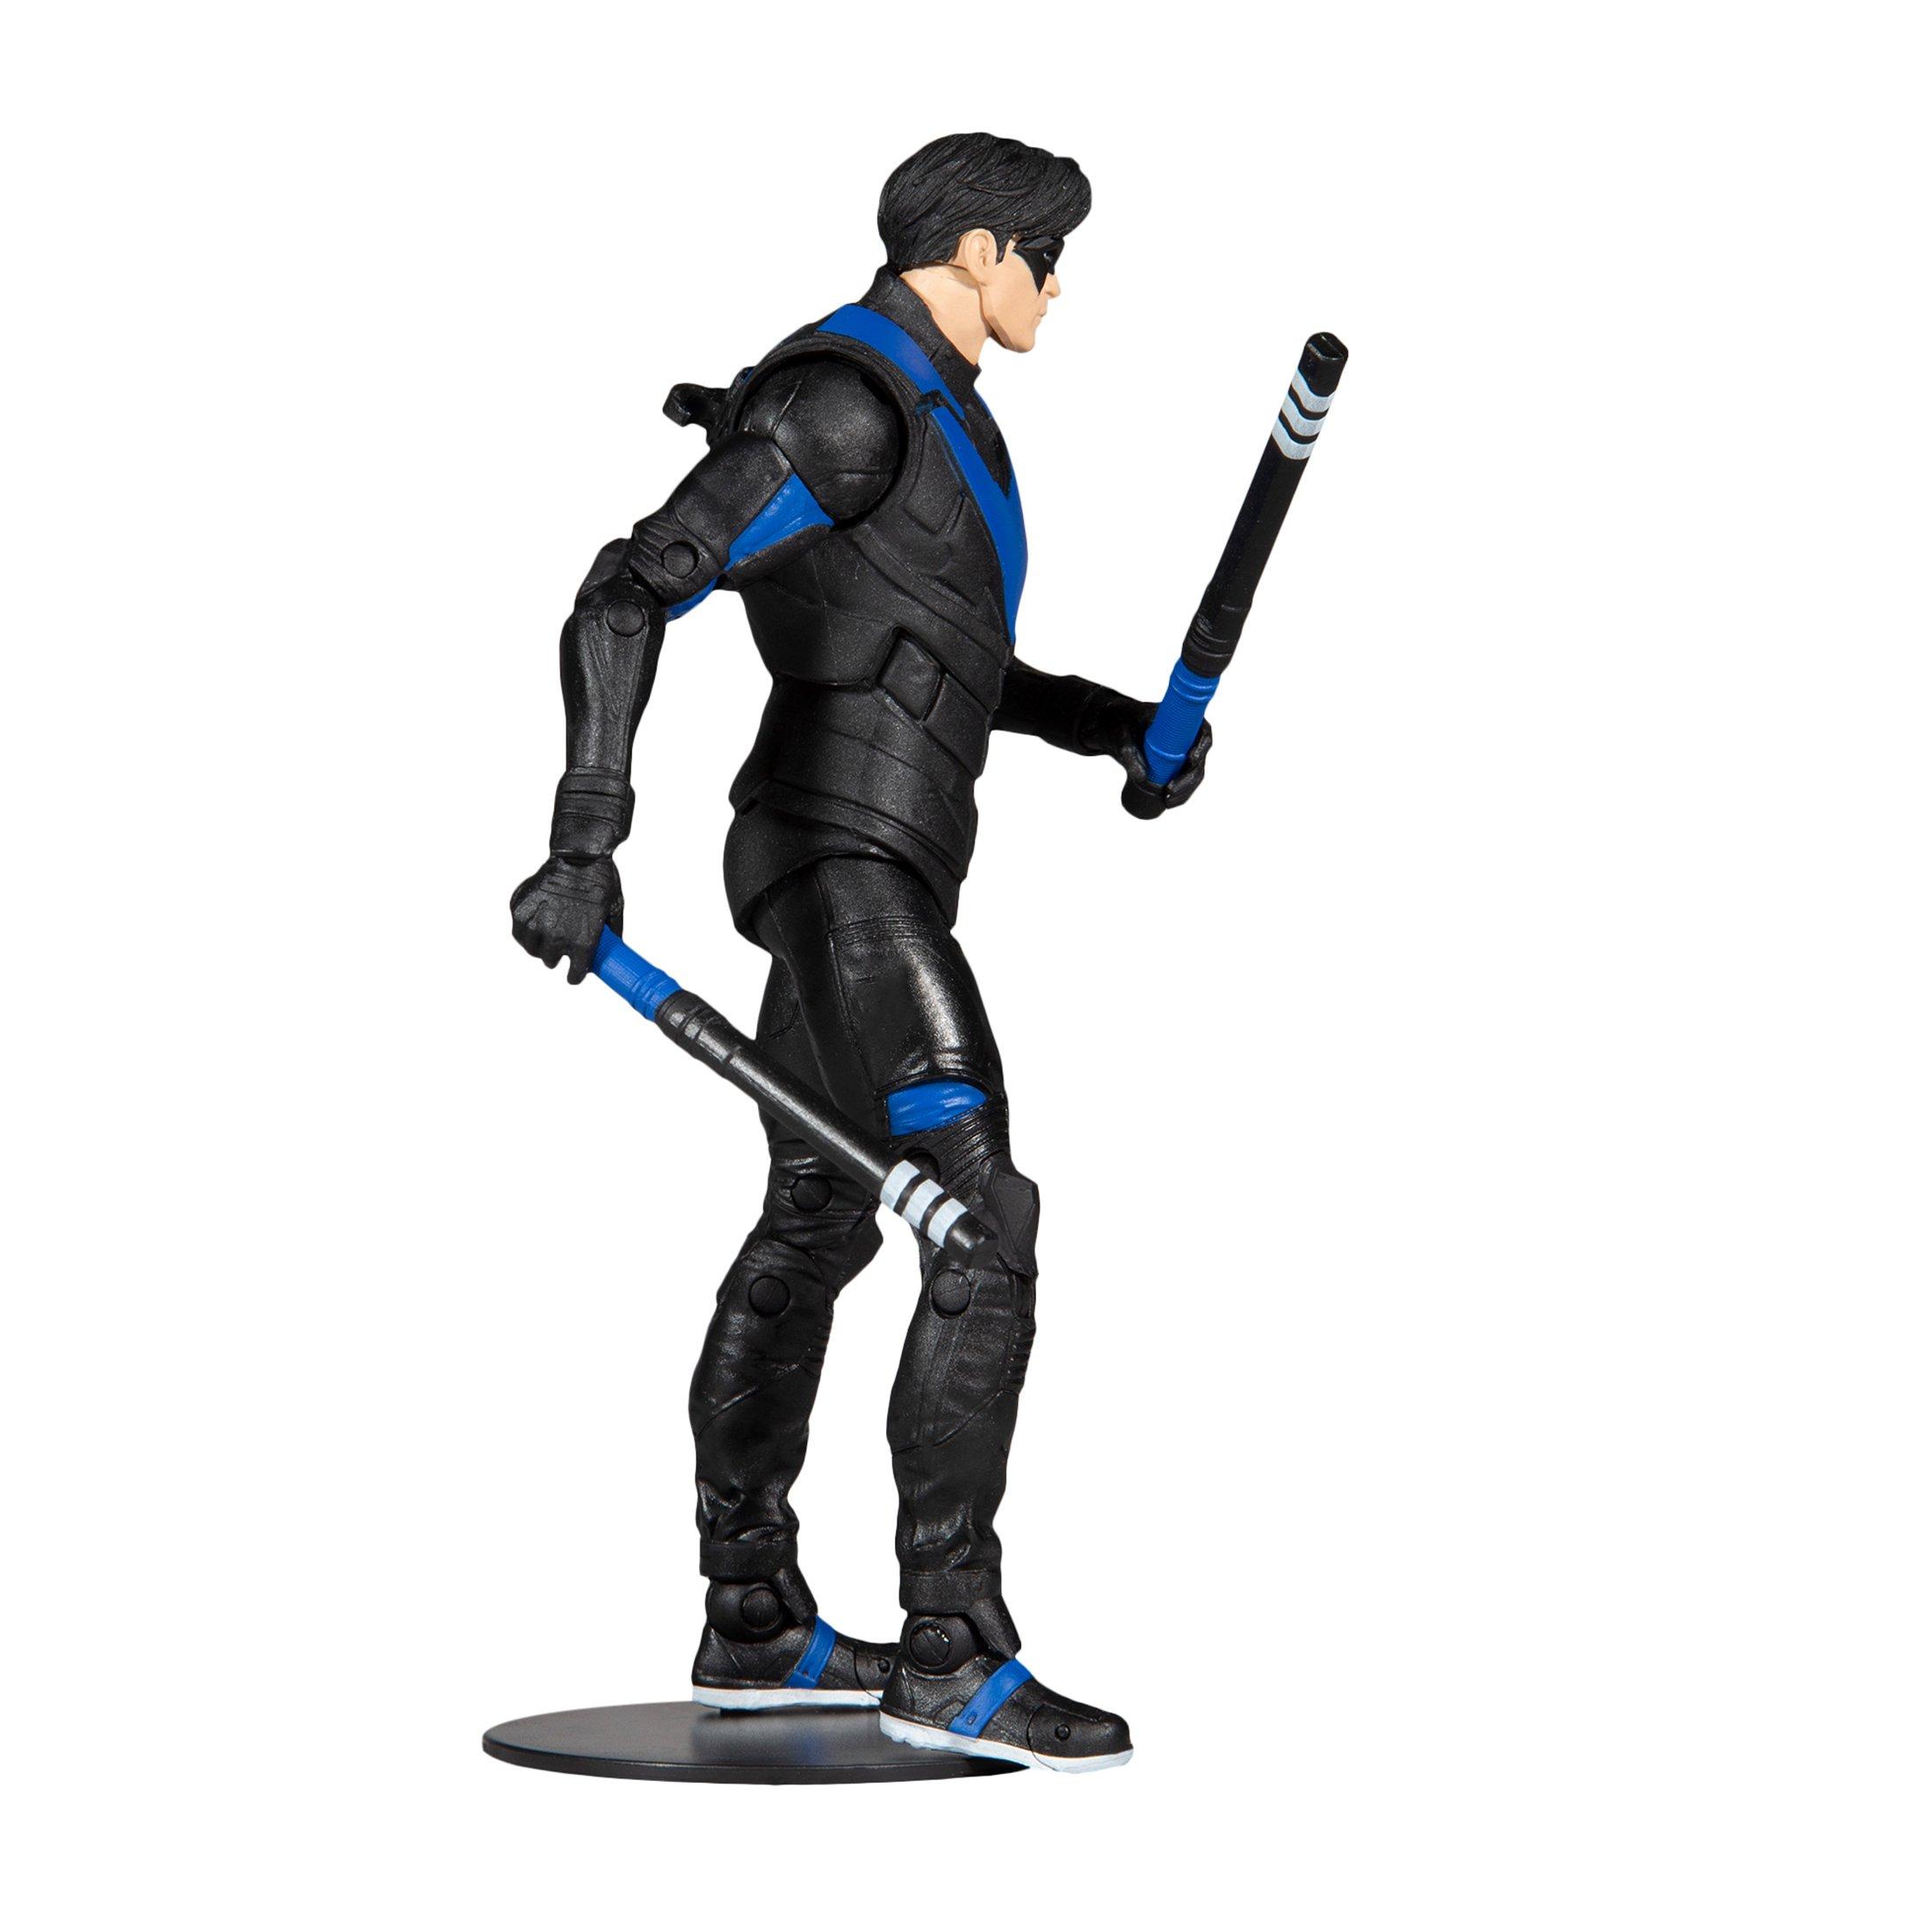 McFarlane Toys DC Multiverse Nightwing 7-in Action Figure